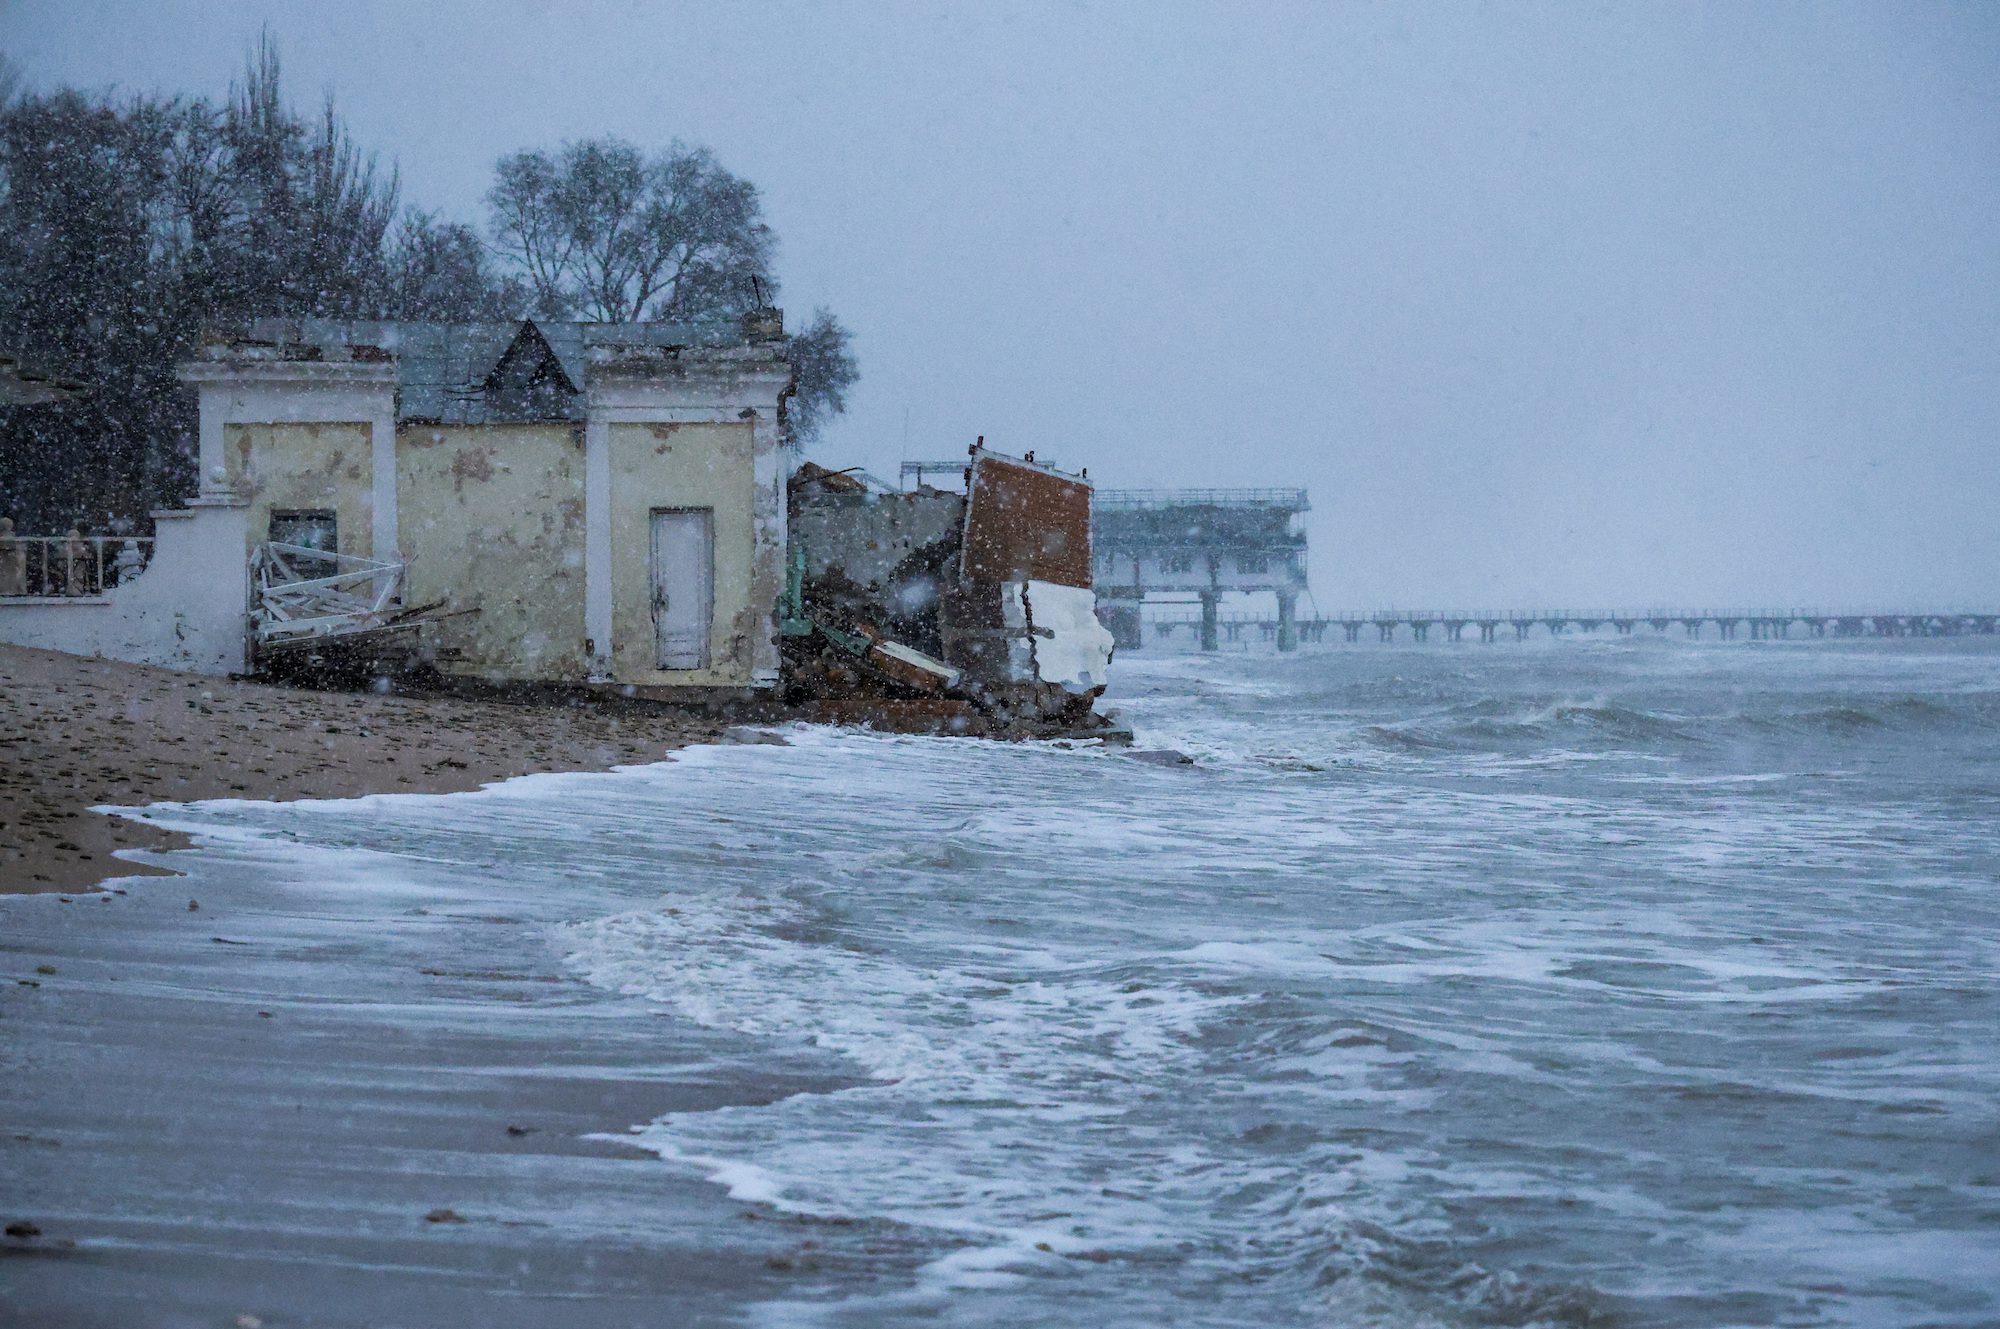 A view shows a damaged building on a beach affected by a powerful storm in Yevpatoriya, Crimea, November 27, 2023. REUTERS/Alexey Pavlishak